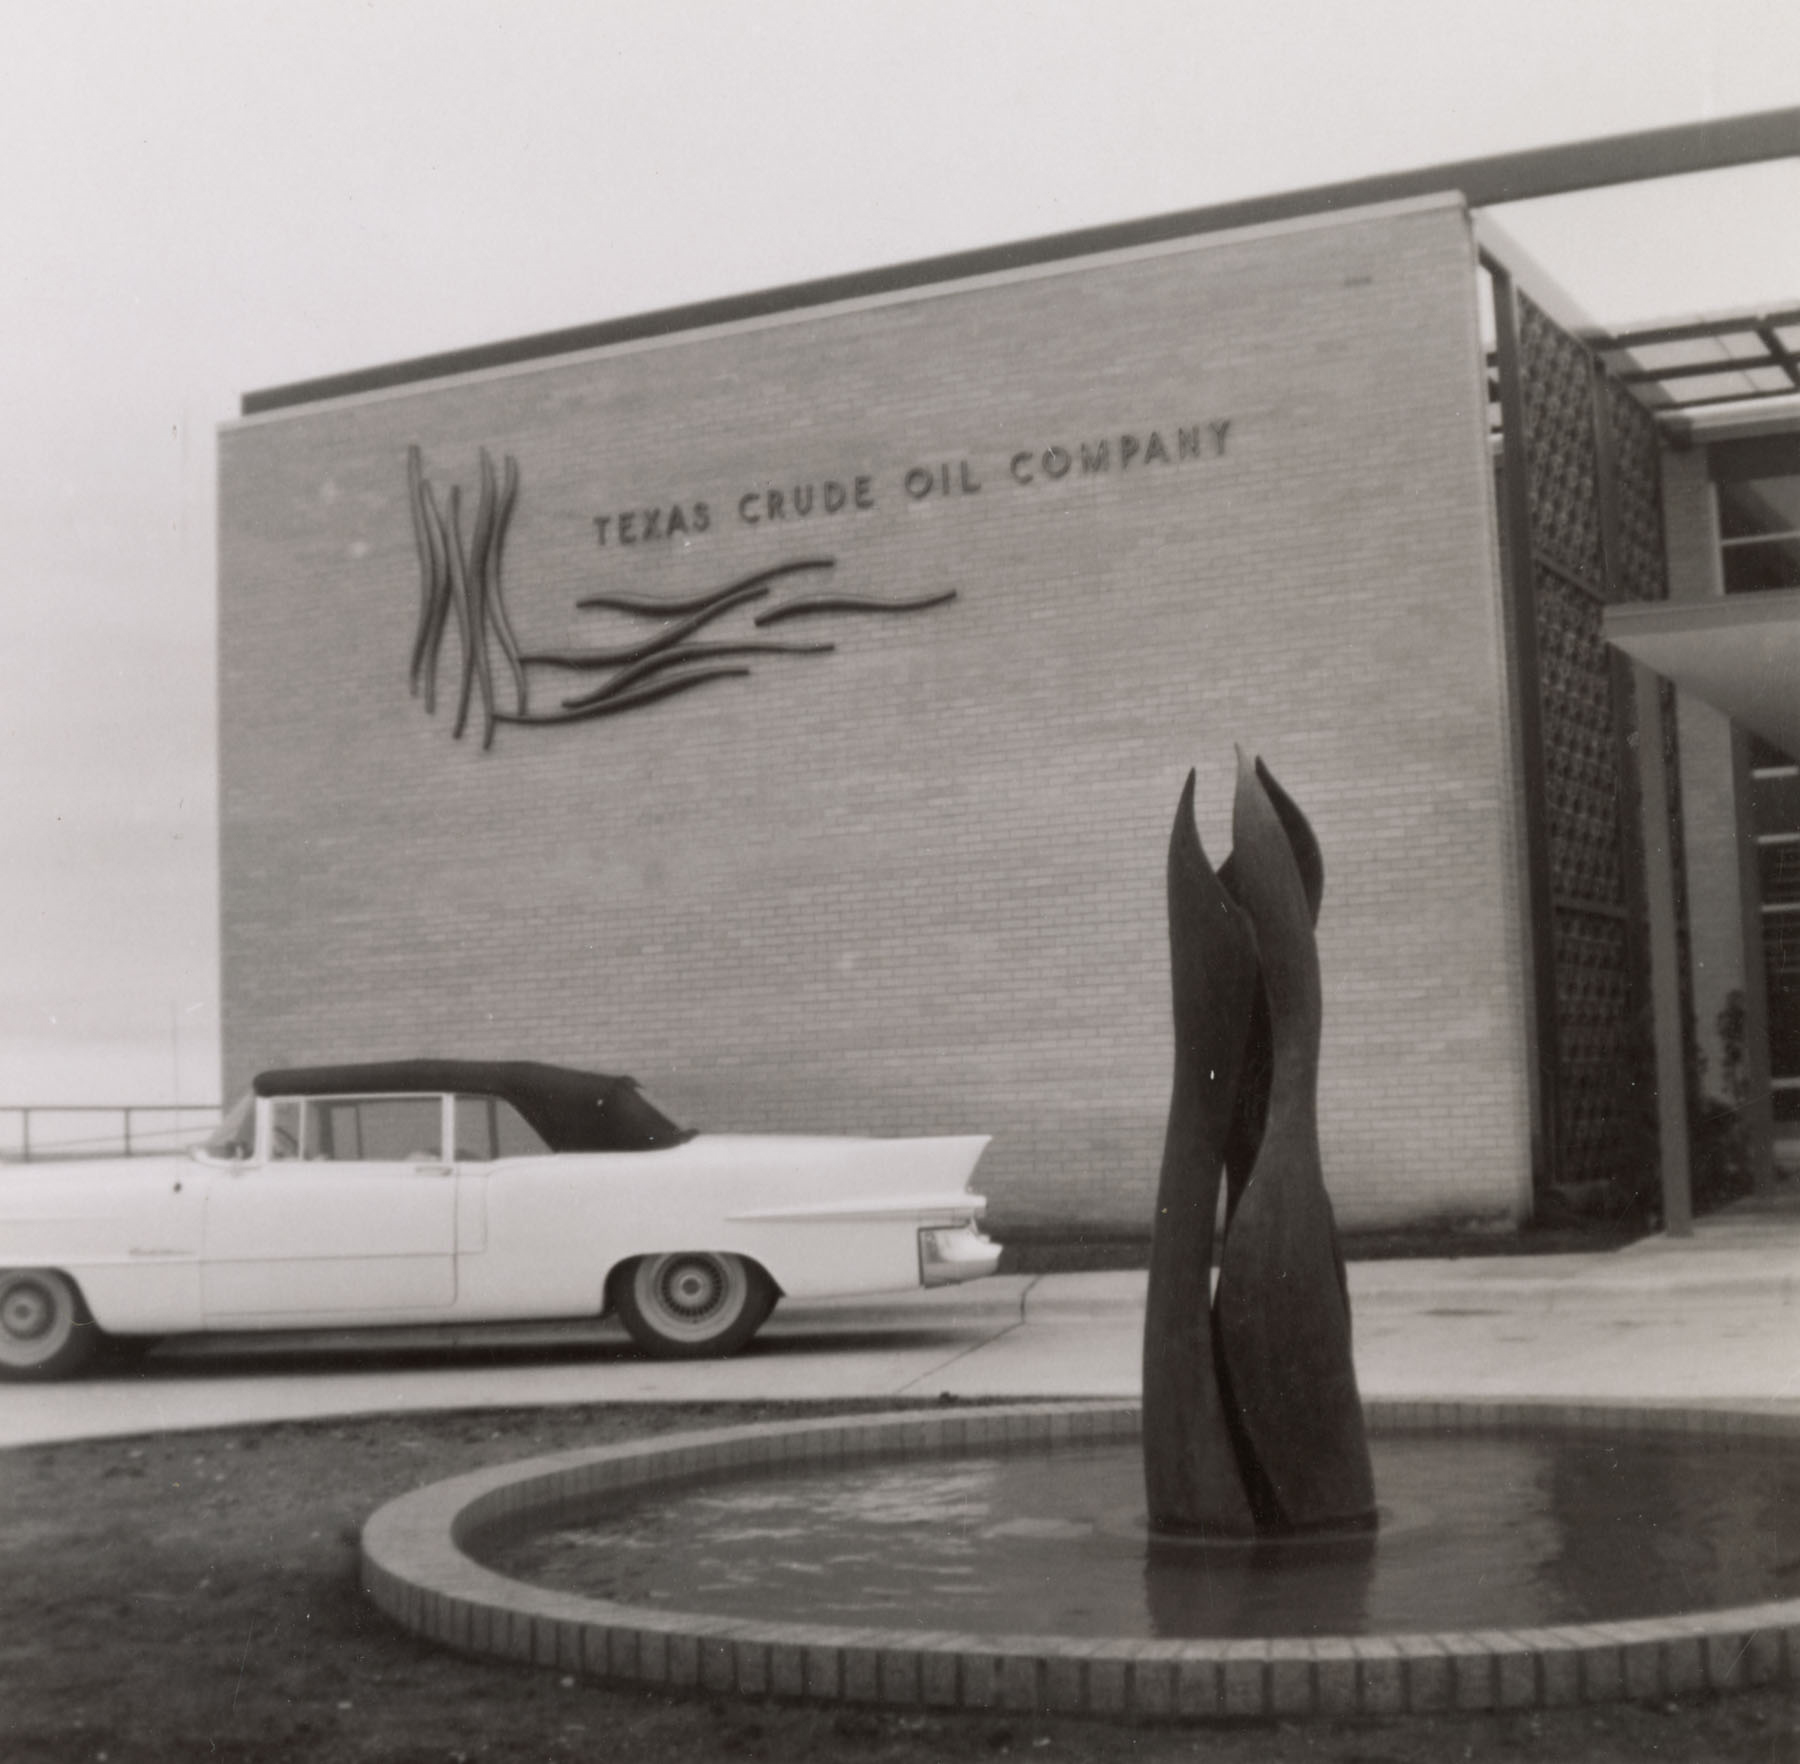 Black-and-white photo of the façade of the “Texas Crude Oil Company” and fountain with a tall sculpture in the center.